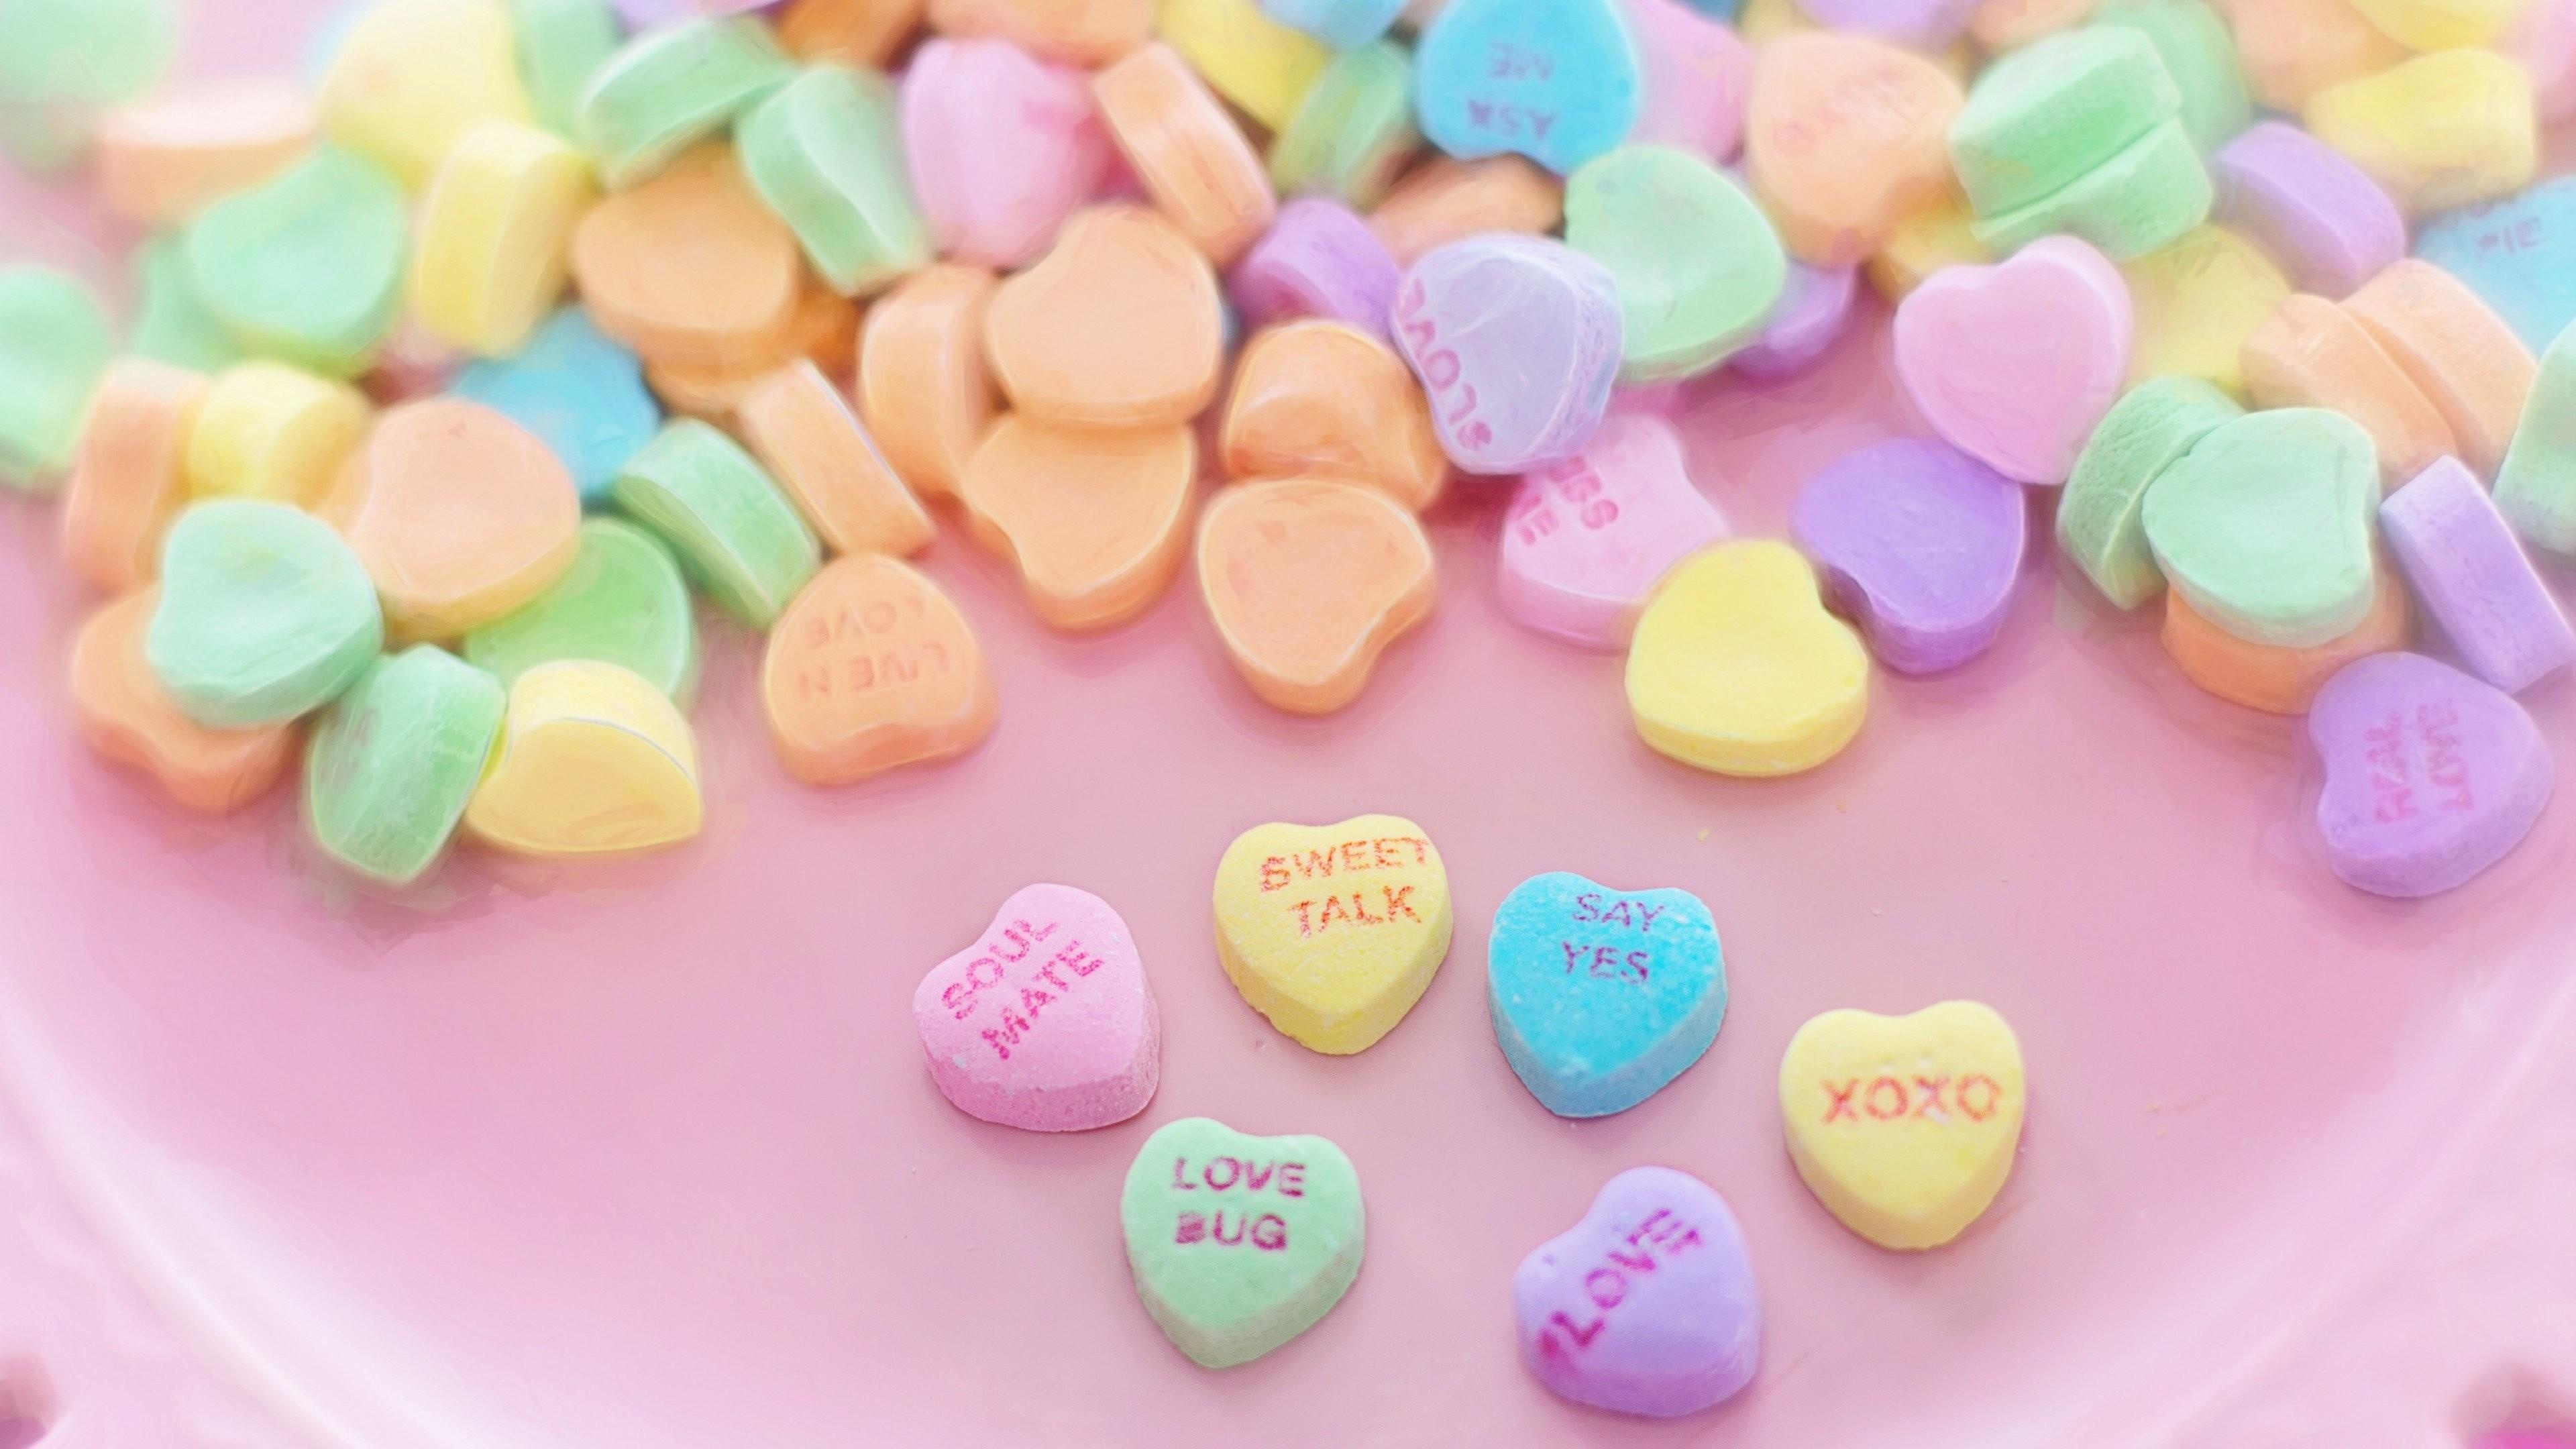 Valentine candy wallpapers, Love-themed confectionery, Romantic sugary treats, Sweet gestures of affection, 3840x2160 4K Desktop